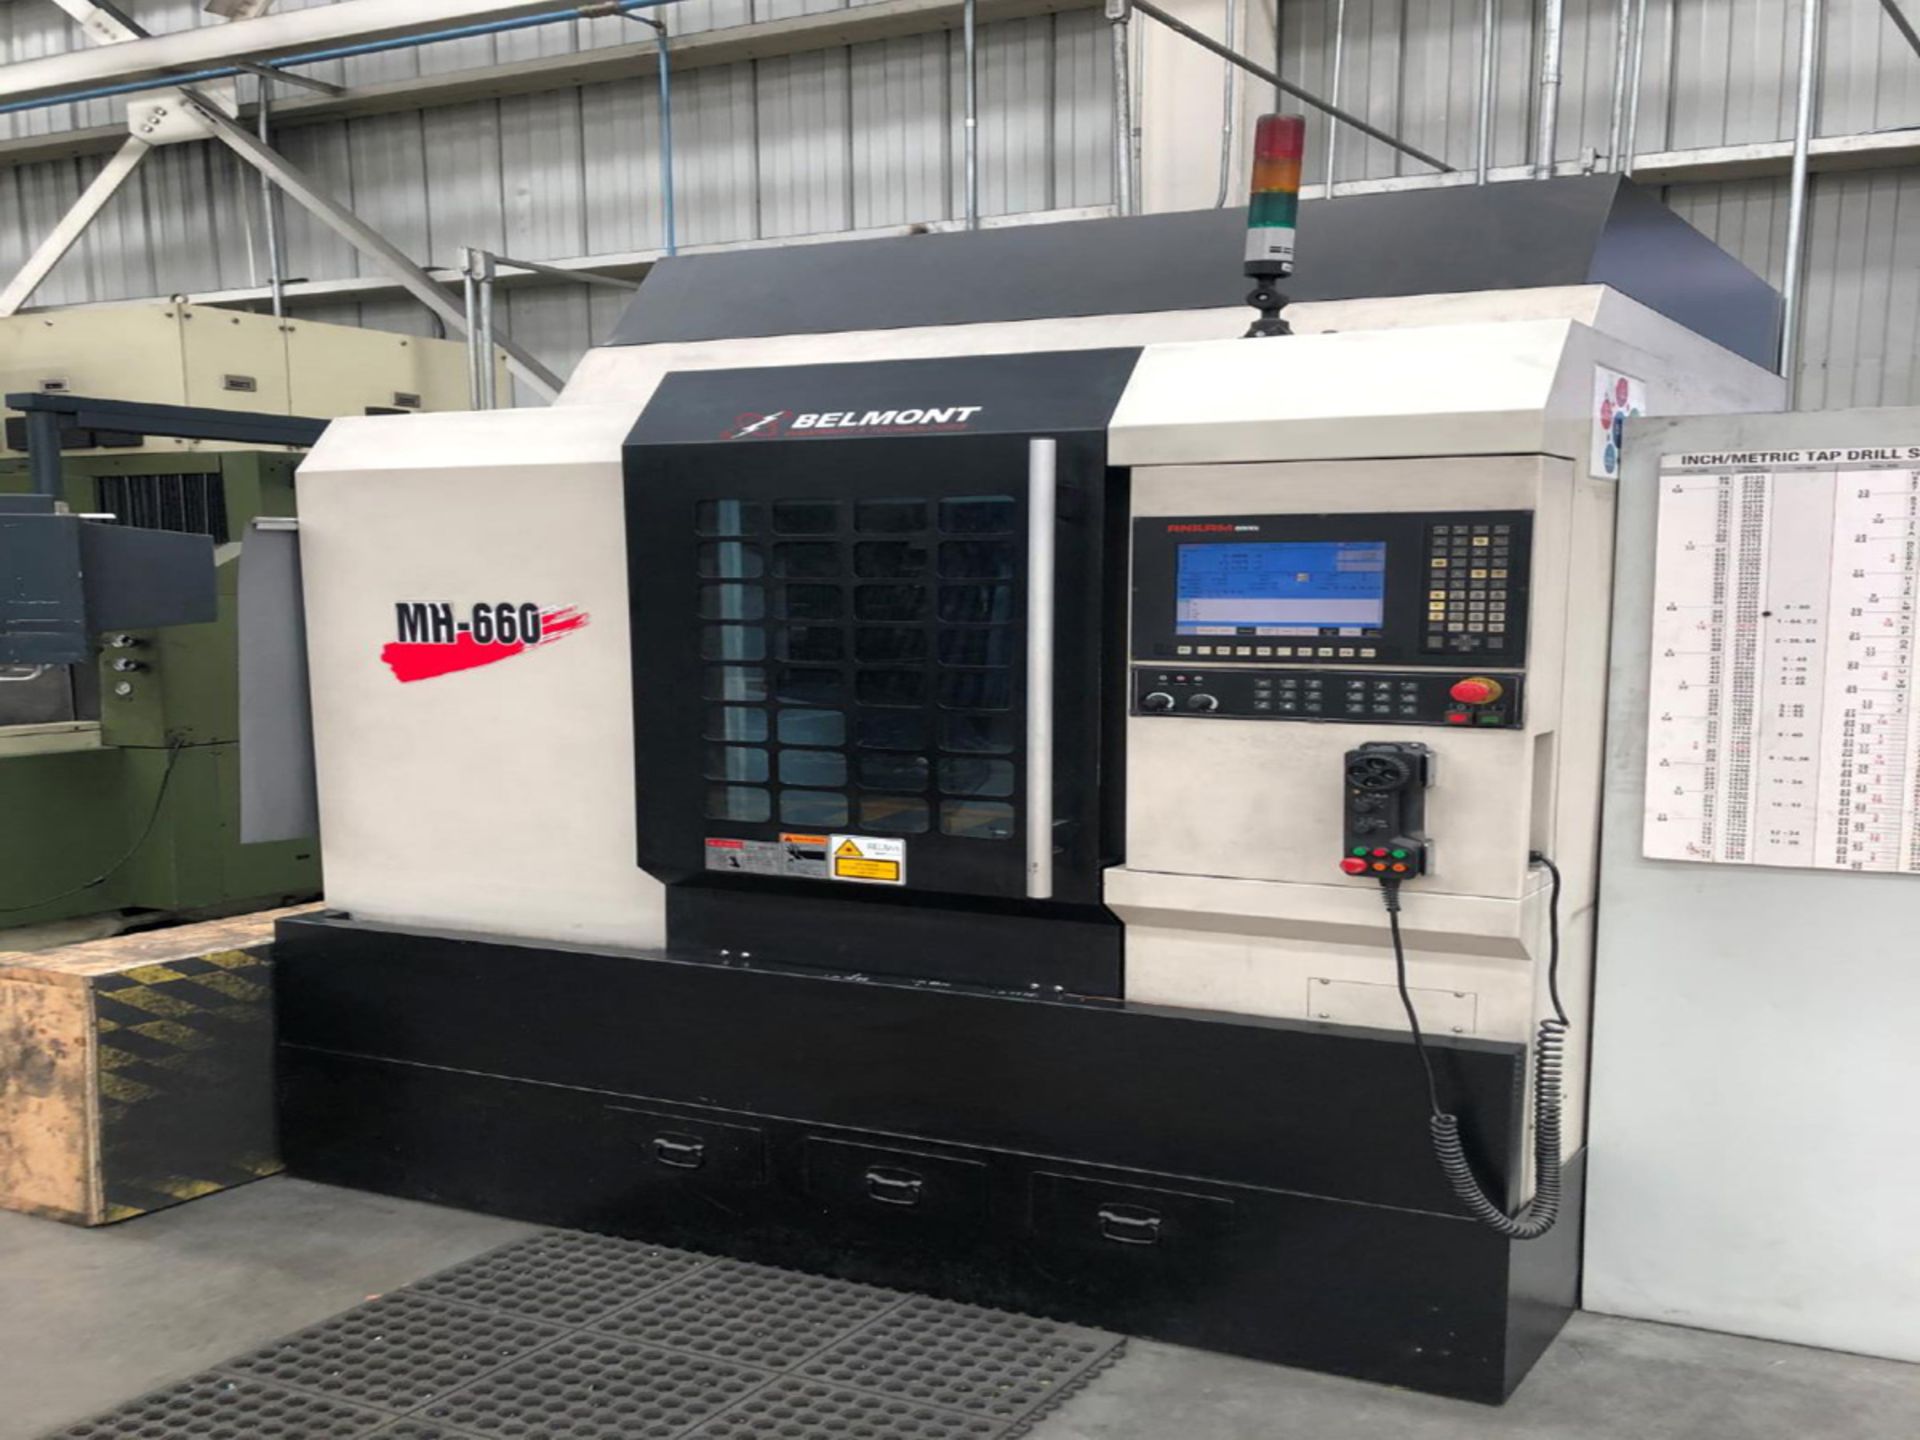 BELMONT (2010) MH-660 CNC HIGH SPEED VERTICAL MACHINING CENTER WITH ANILAM 6000I CNC CONTROL, 23.6"